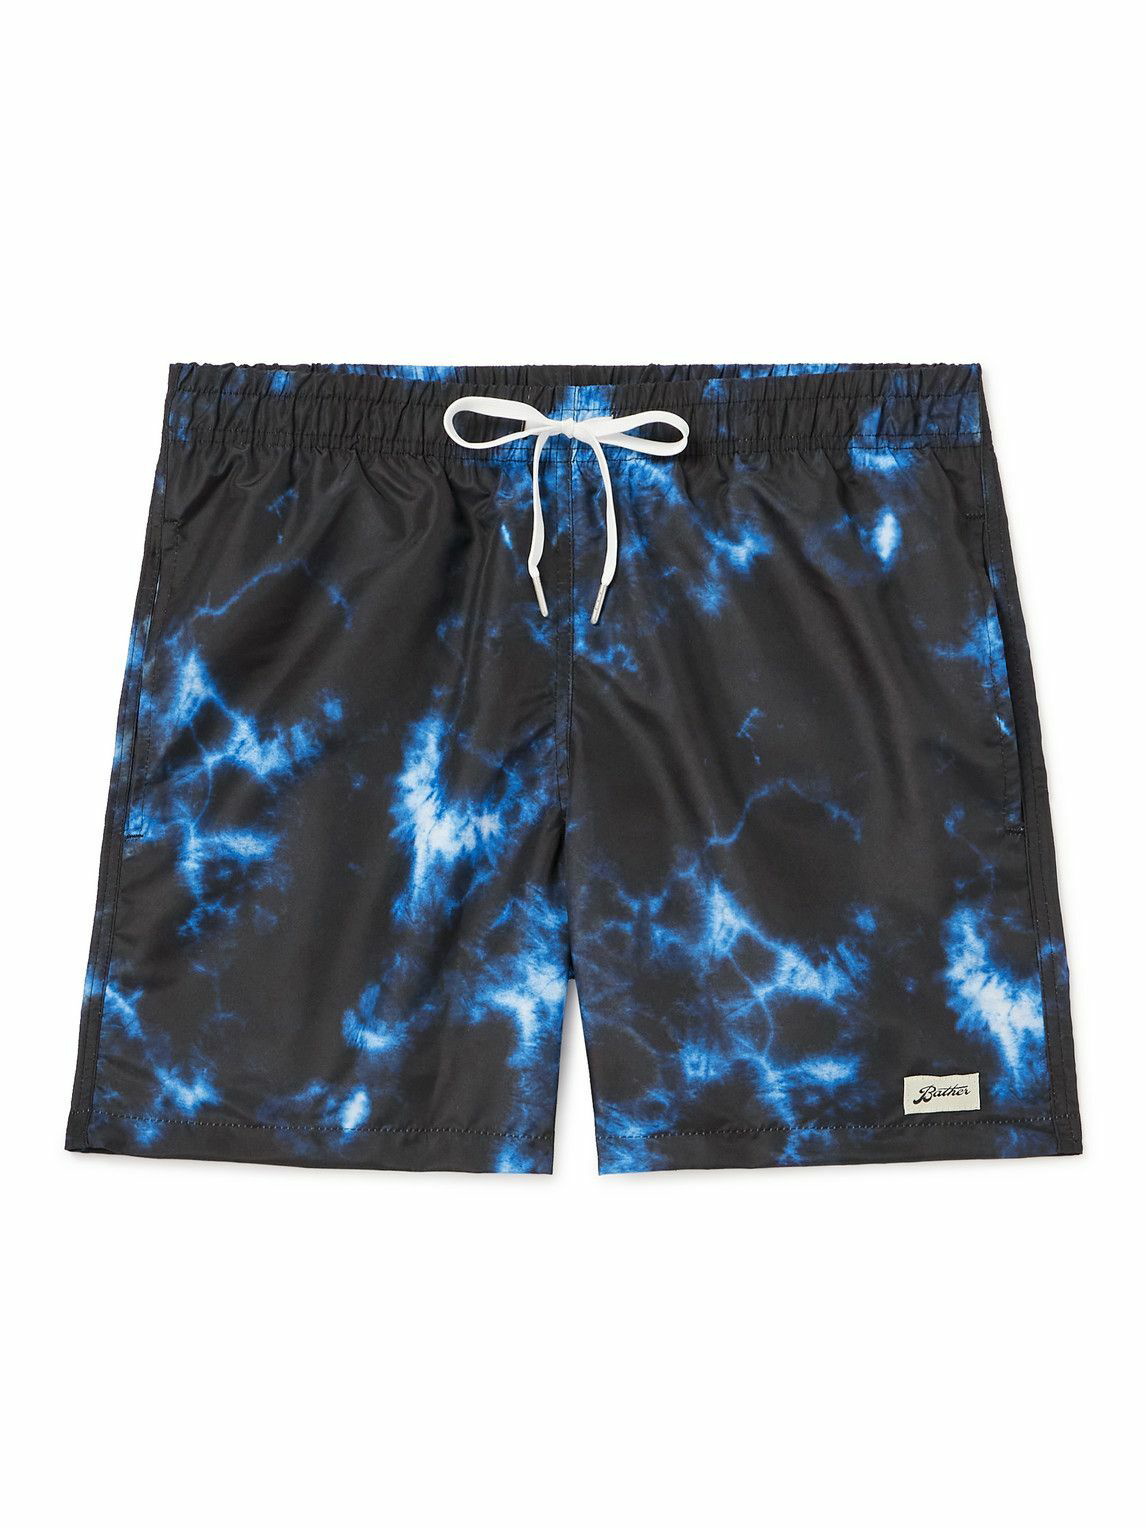 Bather - Tie-Dyed Recycled Swim Shorts - Blue Bather